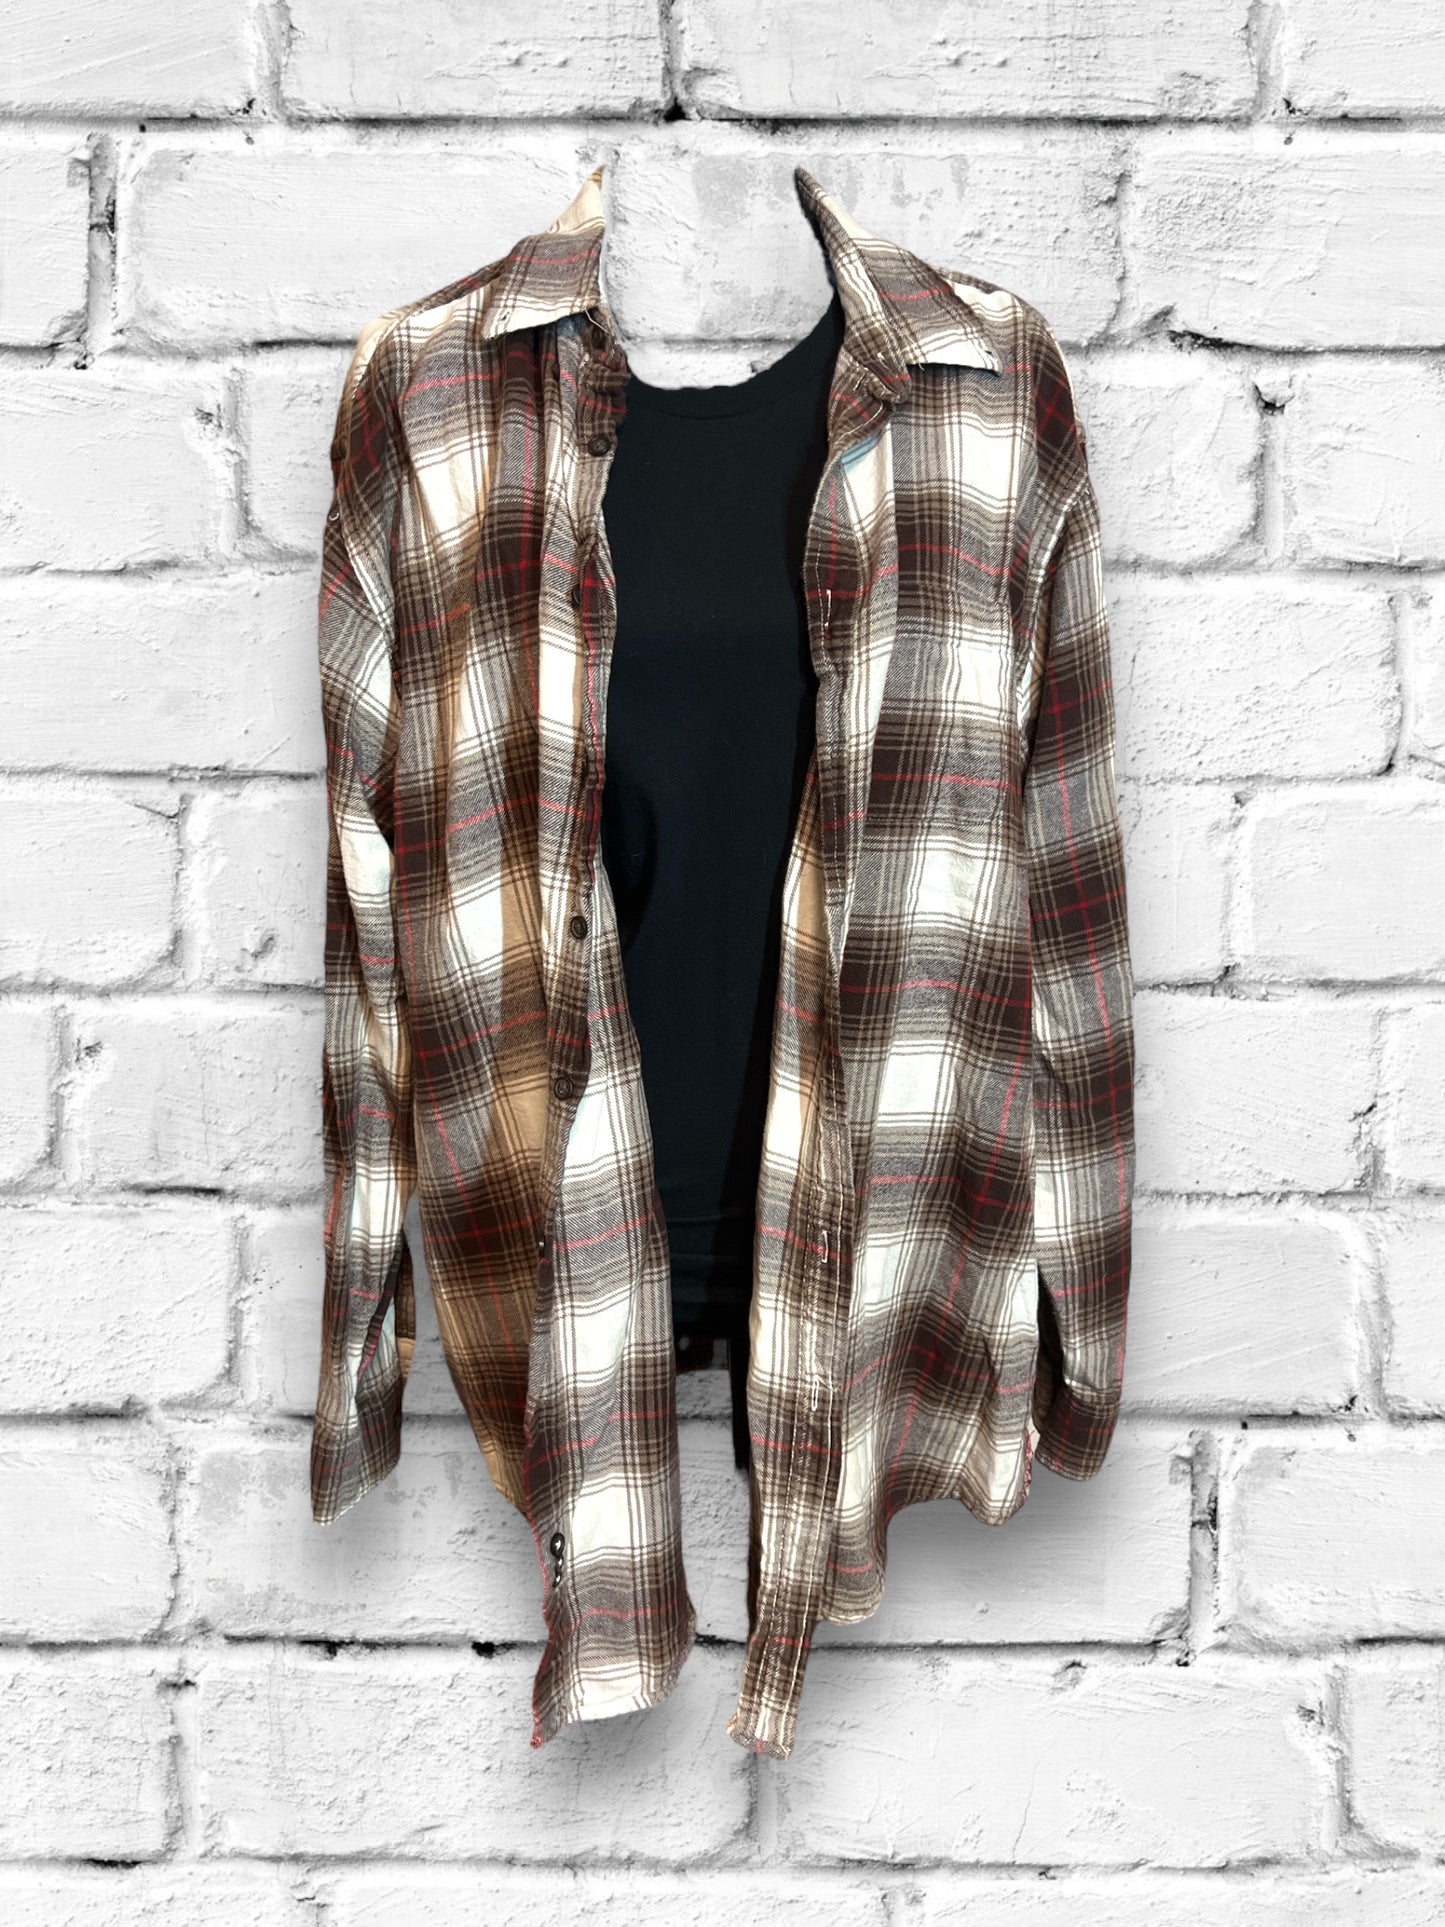 Upcycled Flannel - Men's - Large